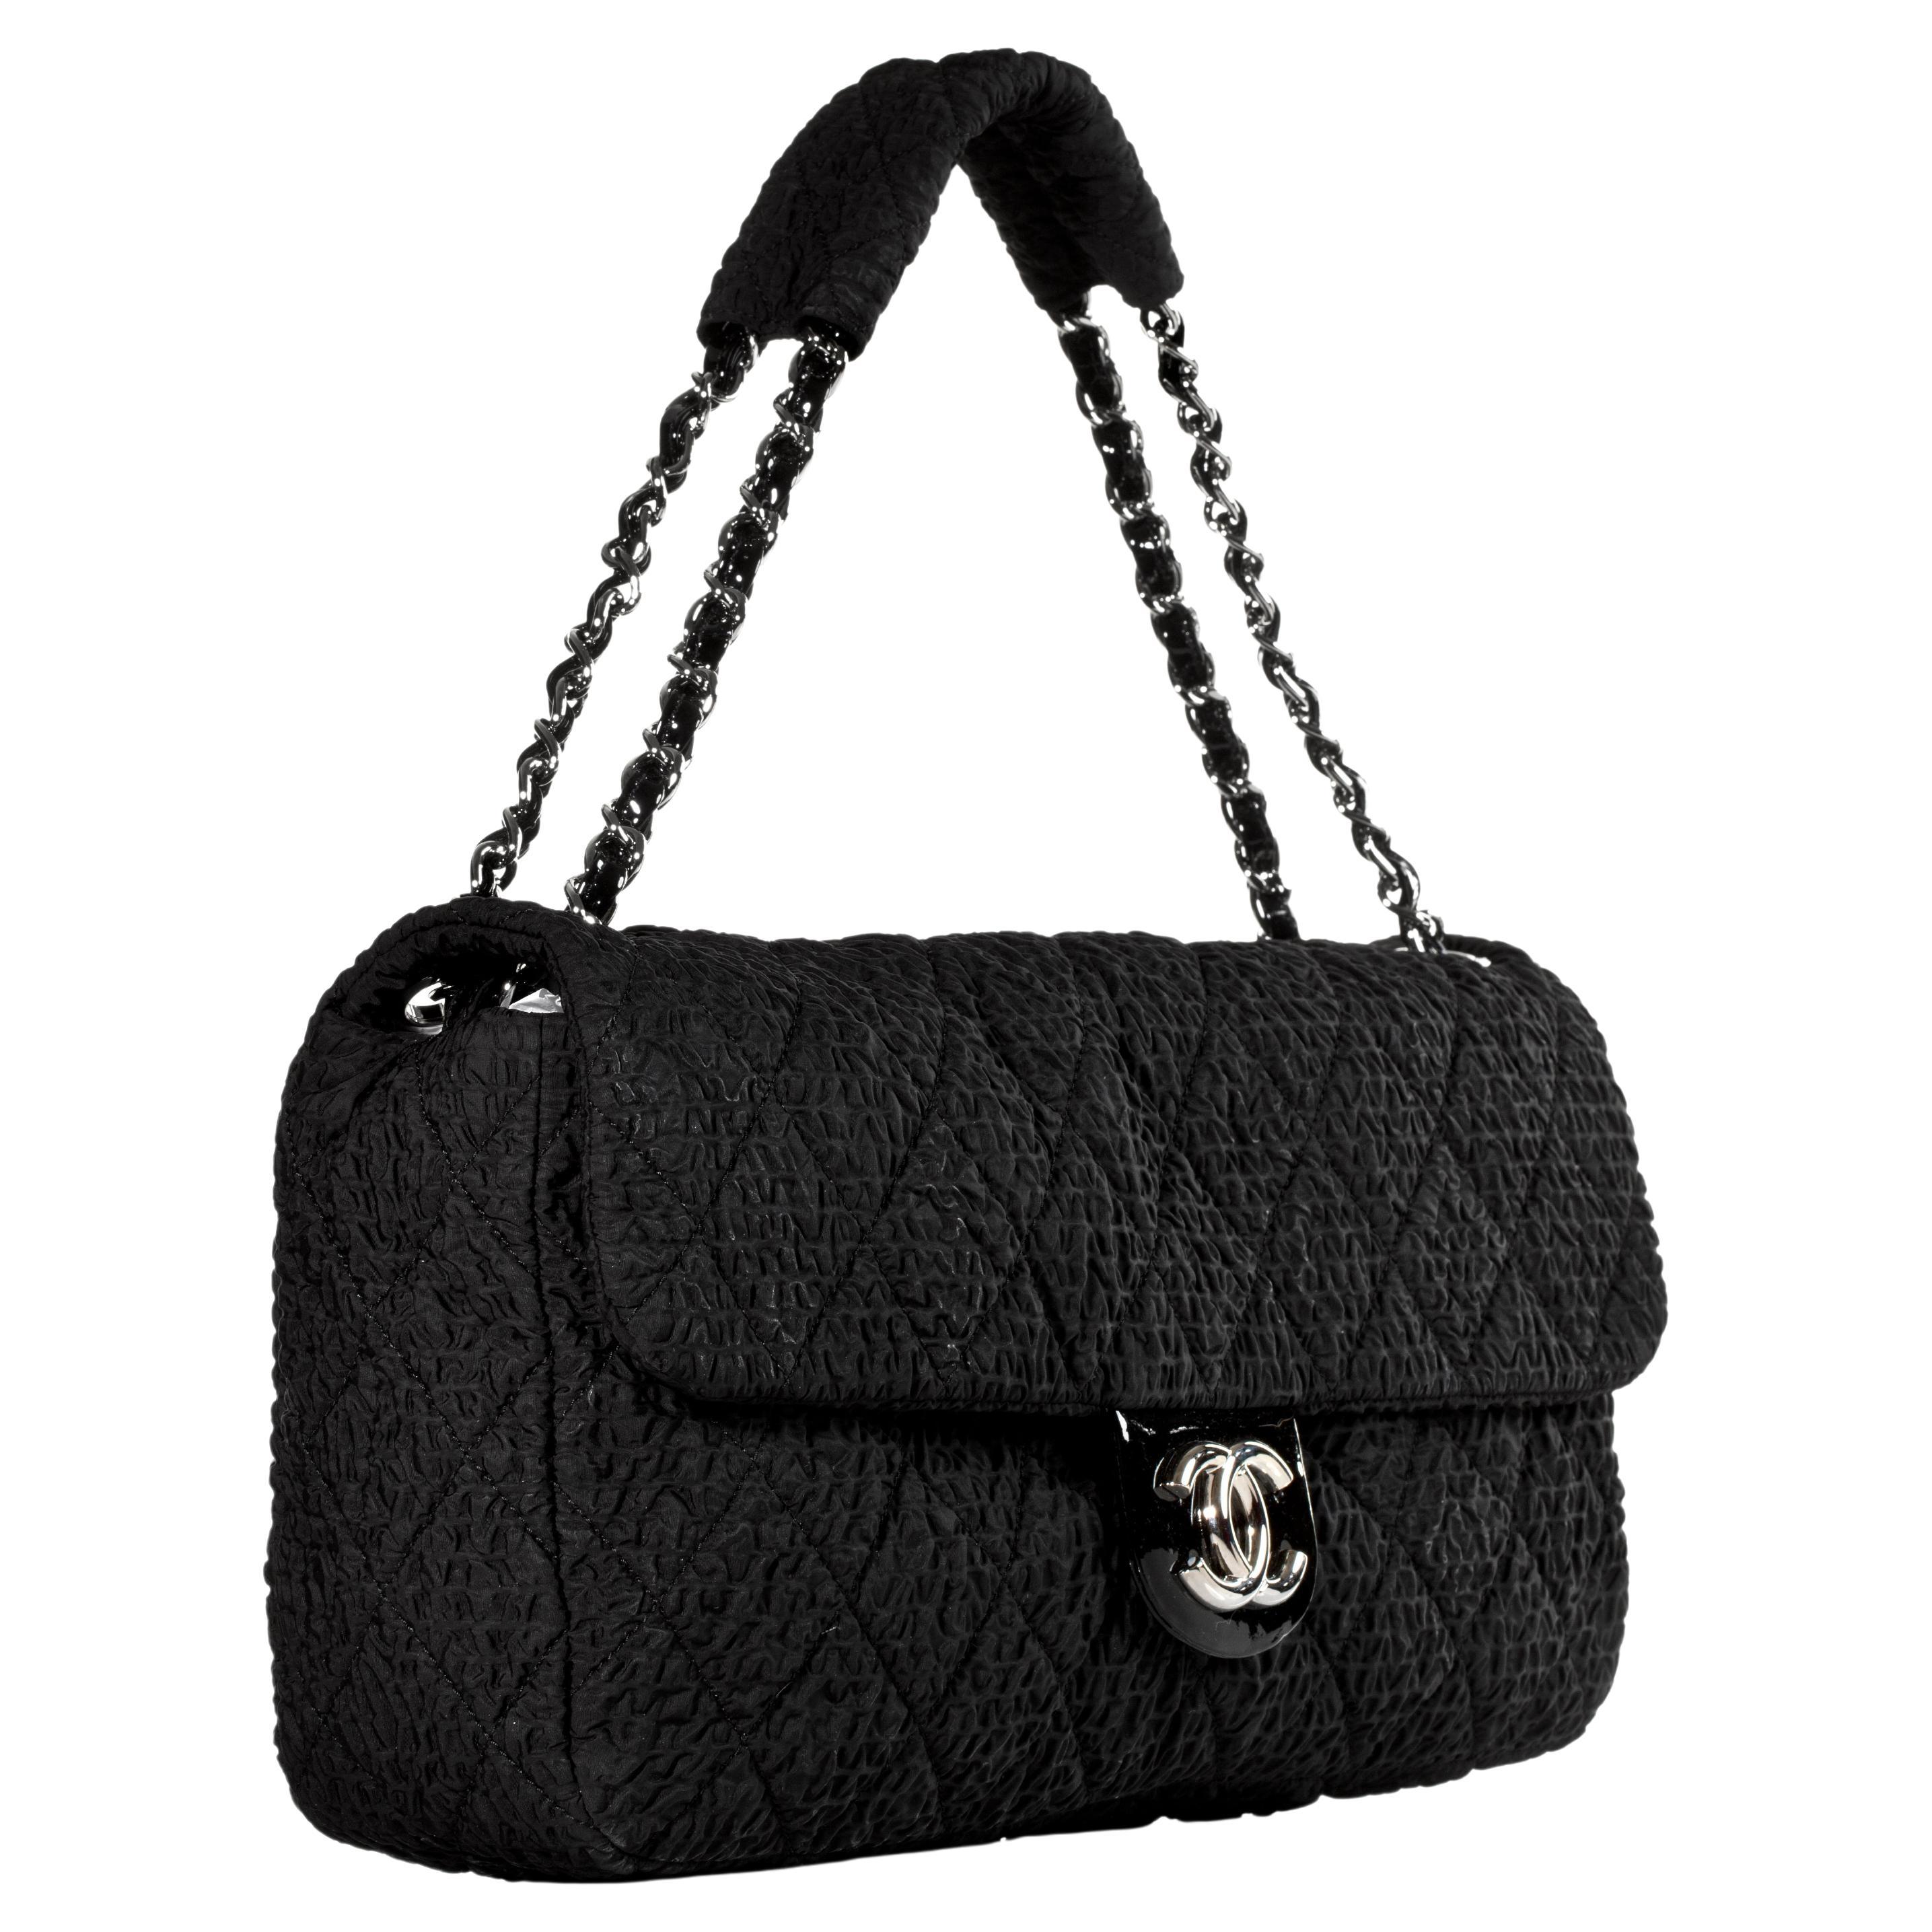 Chanel Classic Flap CC Obsession Rare Black with Dark Blue Pearls Lambskin Bag